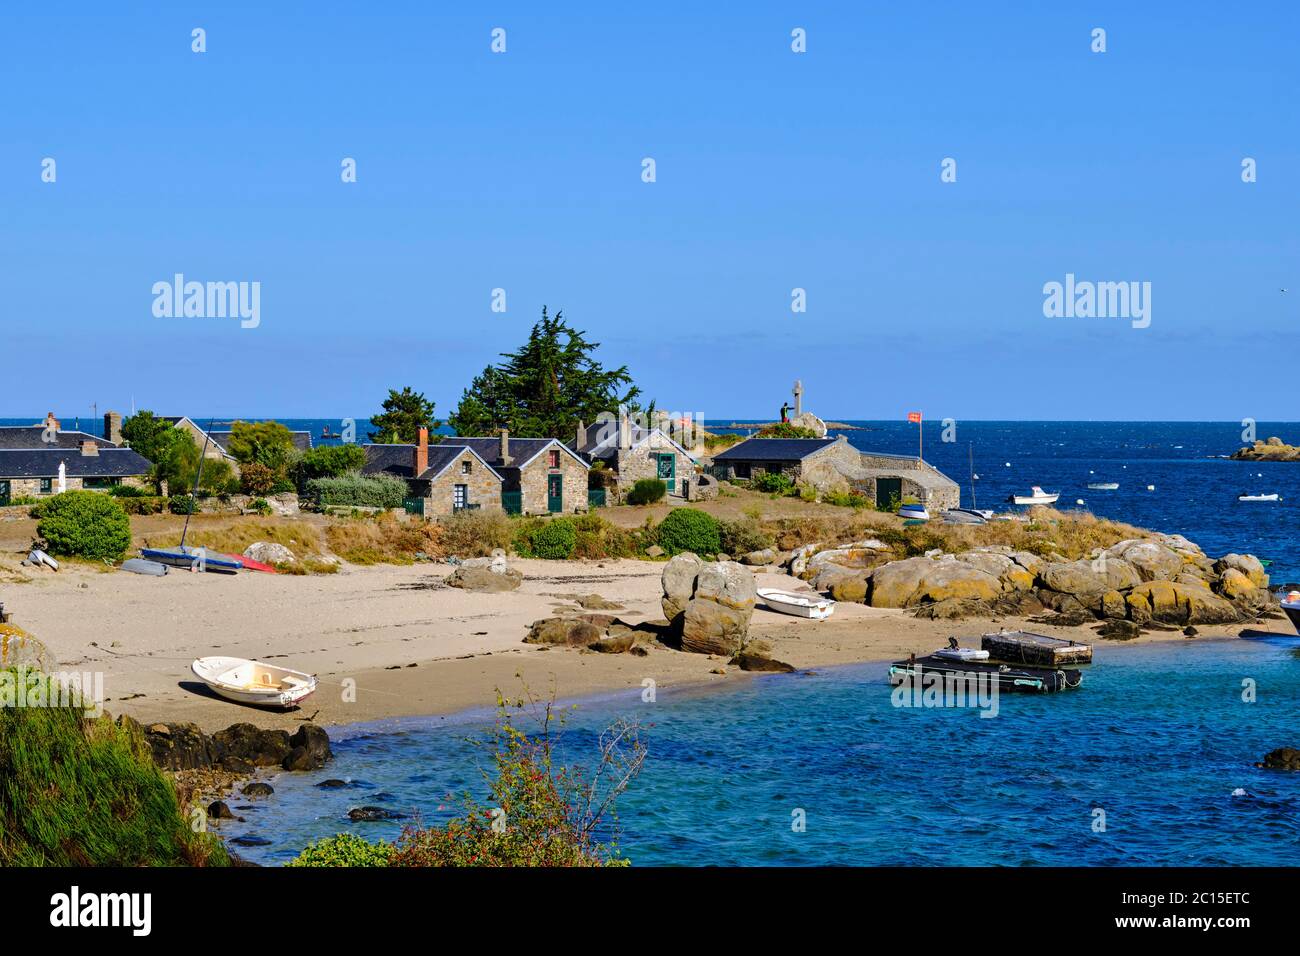 France, Normandy, Manche department, Chausey isands, Blainvillais village Stock Photo